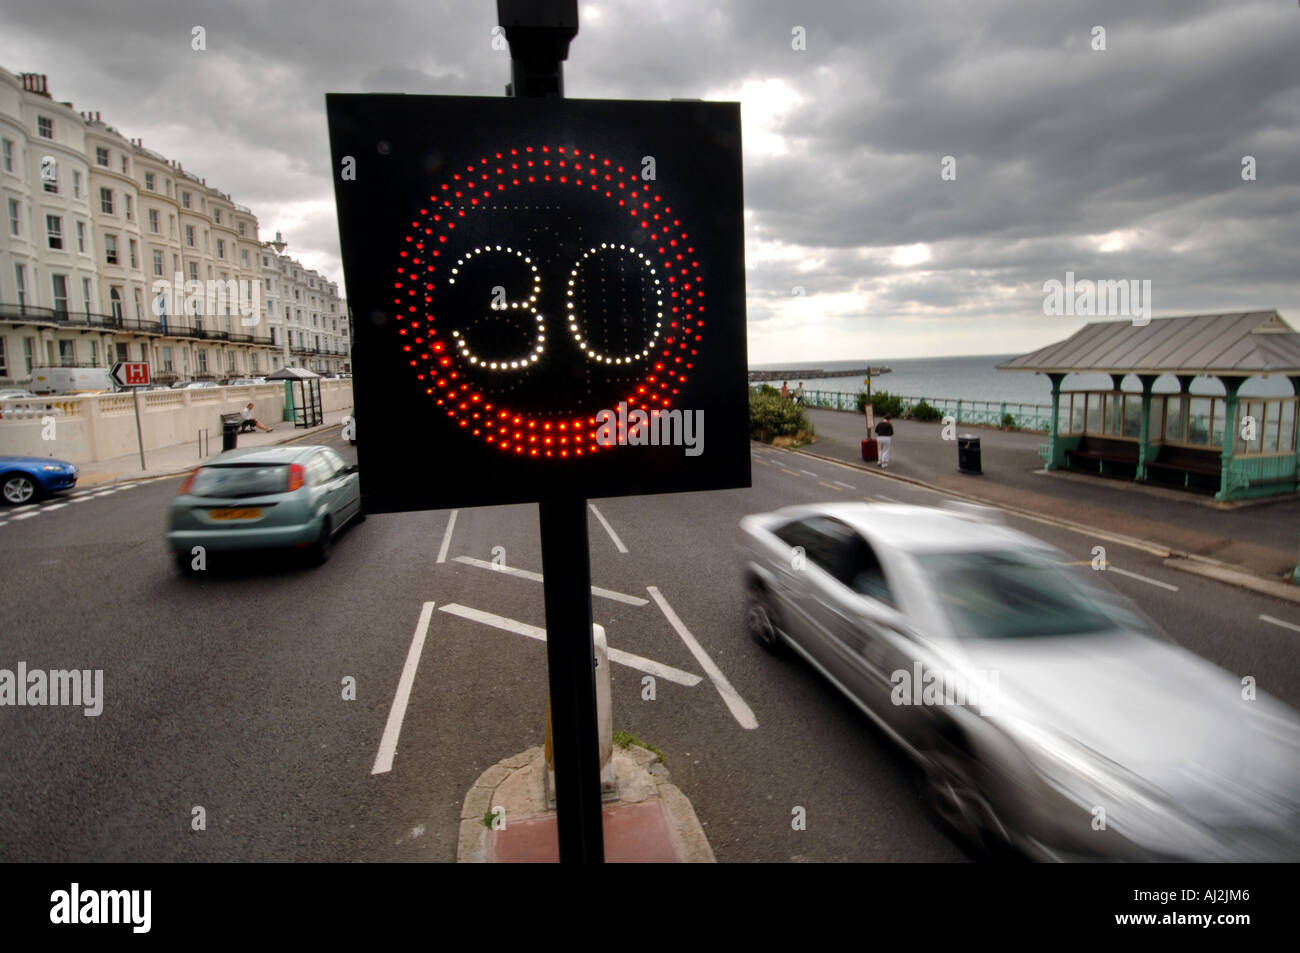 Traffic on Brighton seafront is warned of the 30 mph miles per hour speed limit by an illuminated sign Stock Photo